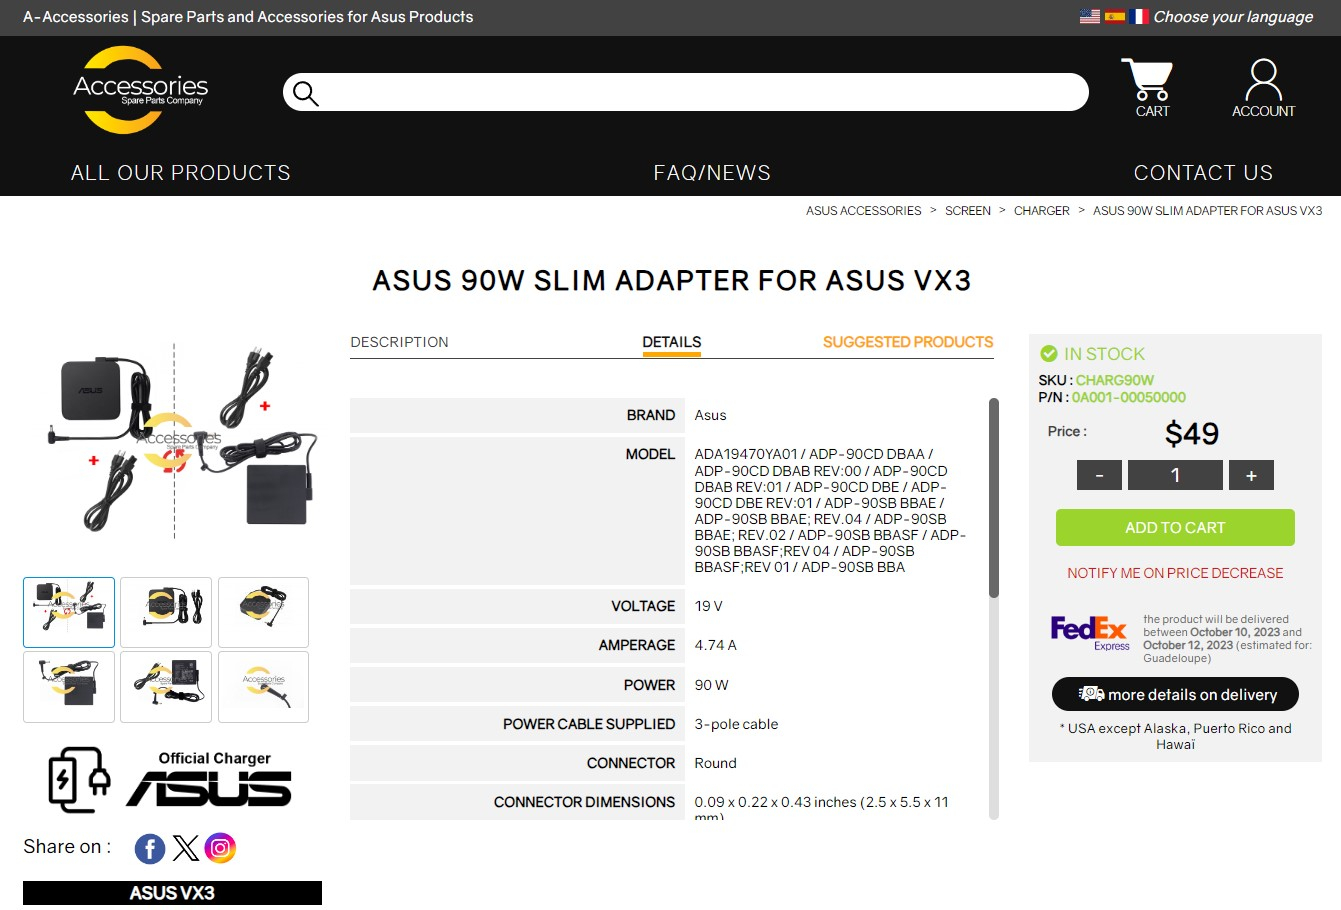 Details asus 90W slim adapter for Asus VX3